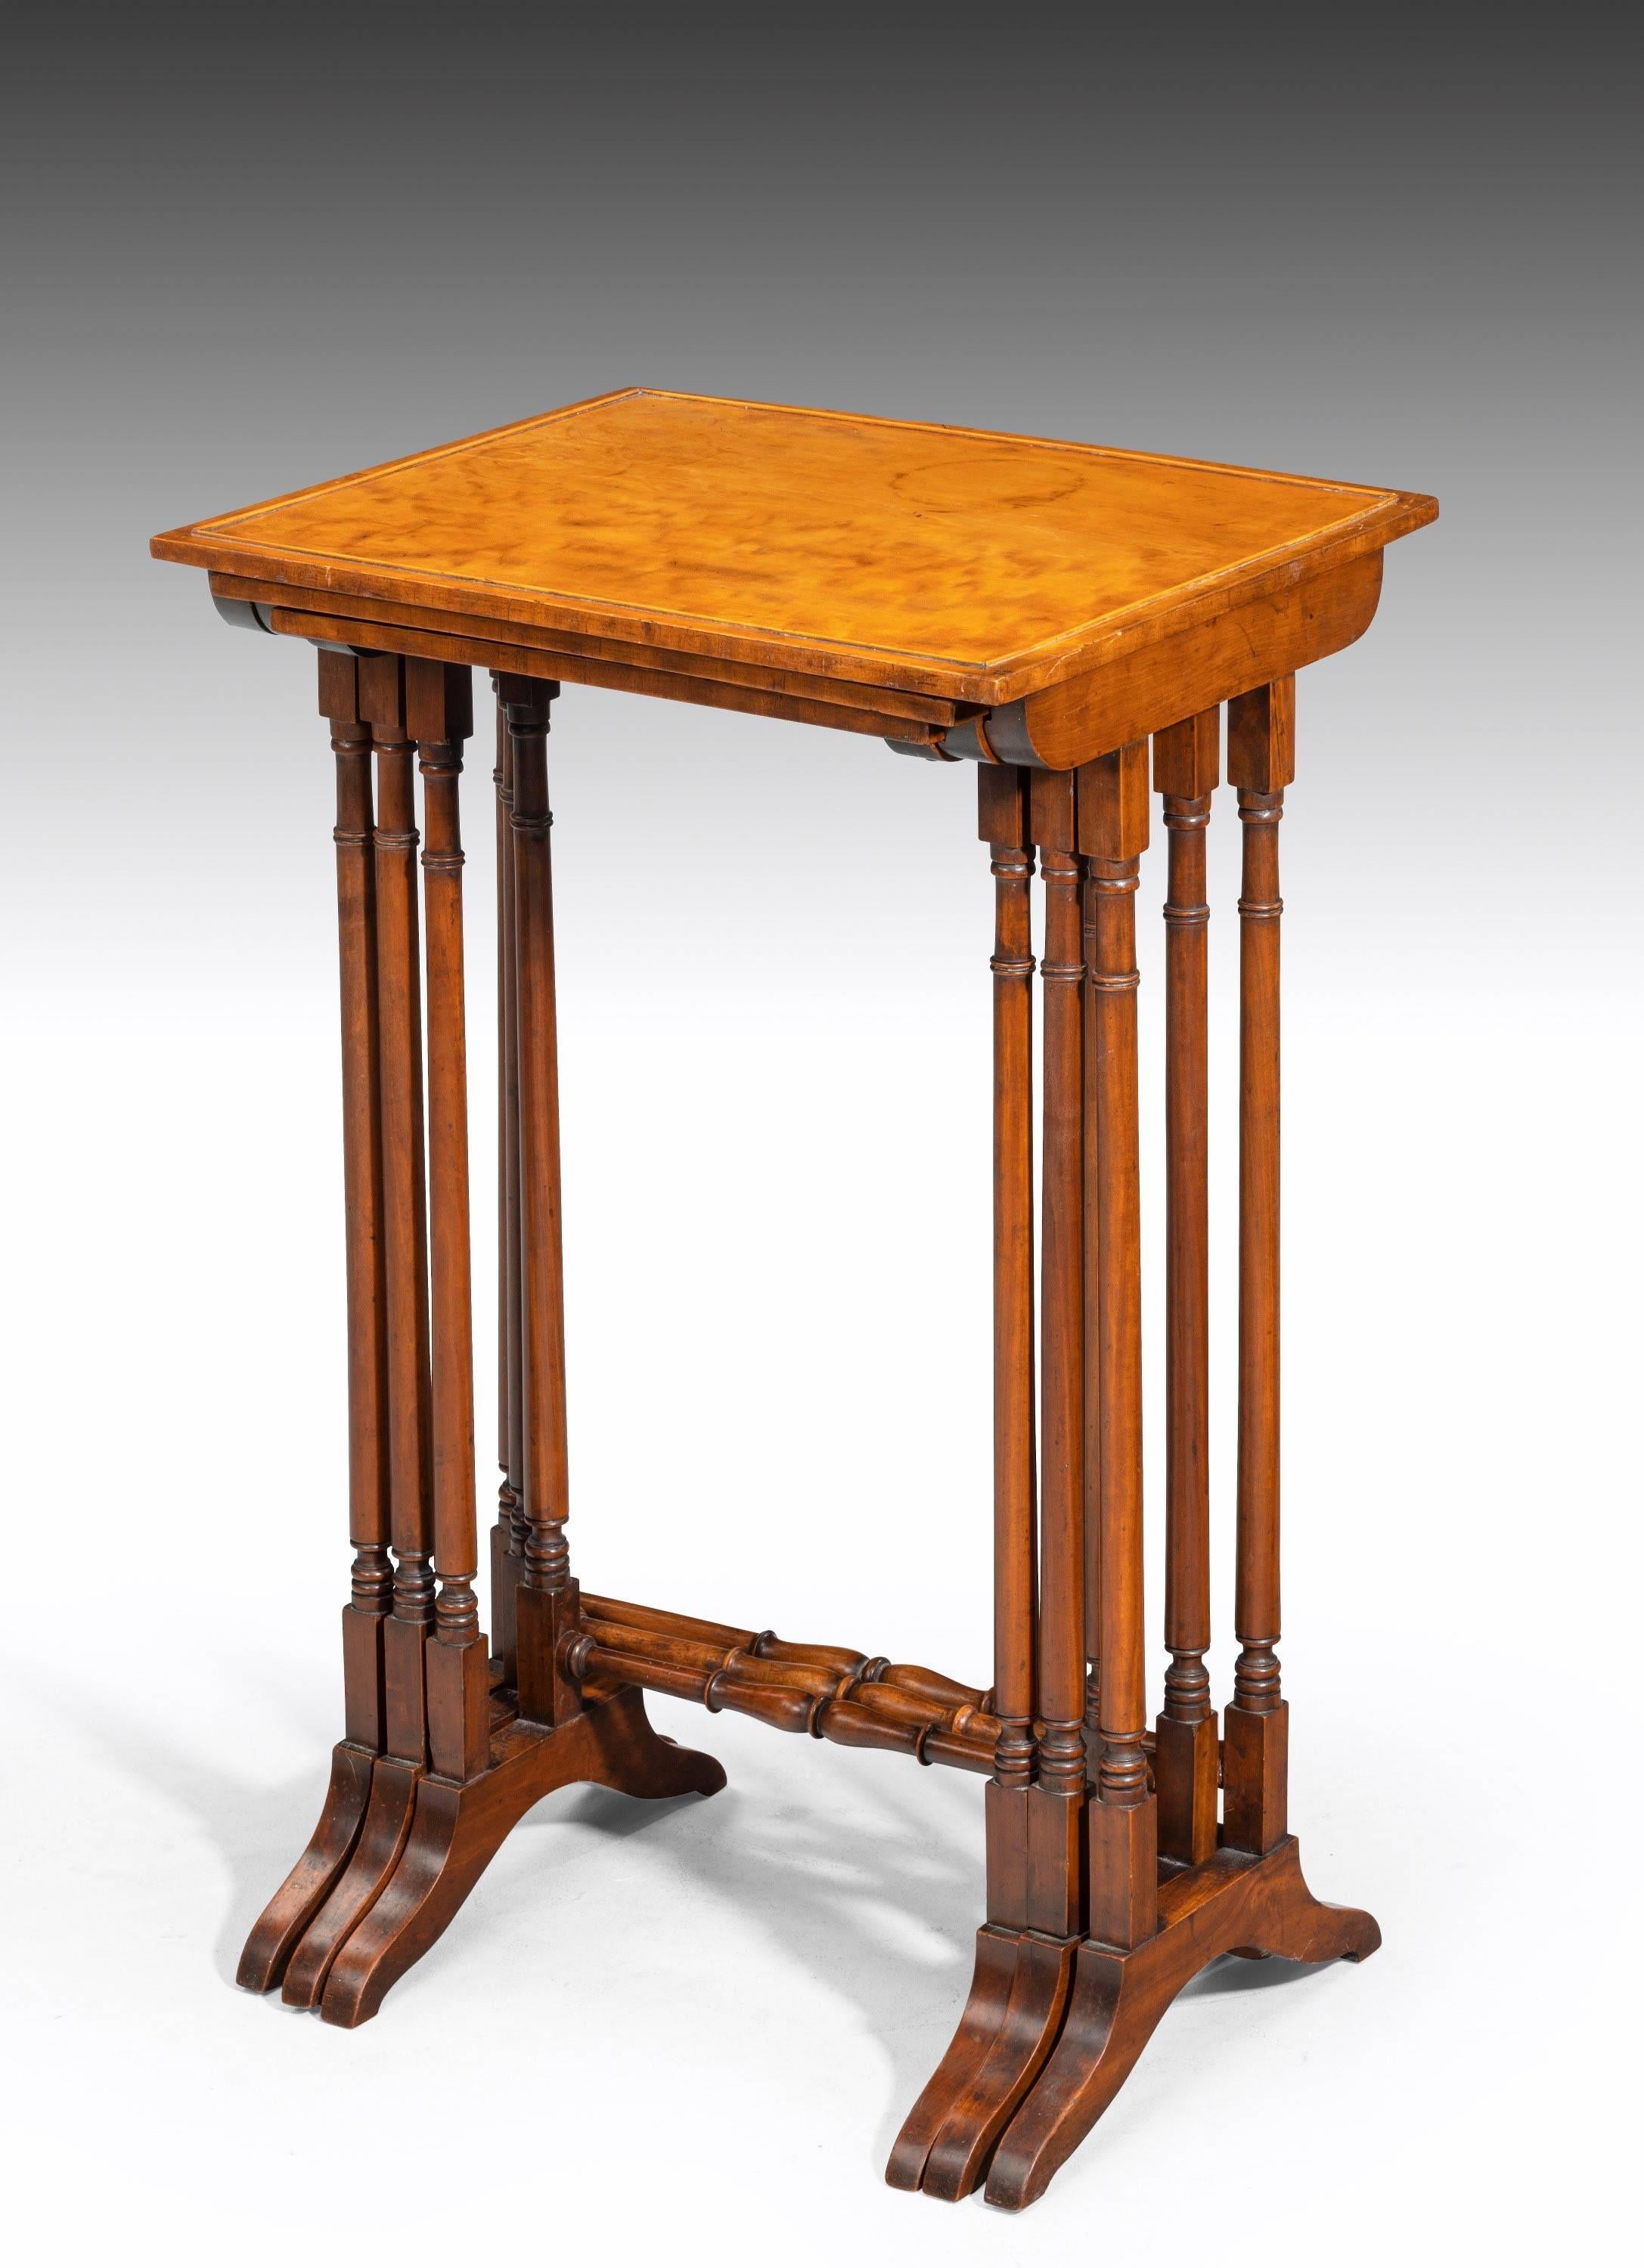 An attractive set Regency period golden mahogany tables on finely turned supports with shoe feet.